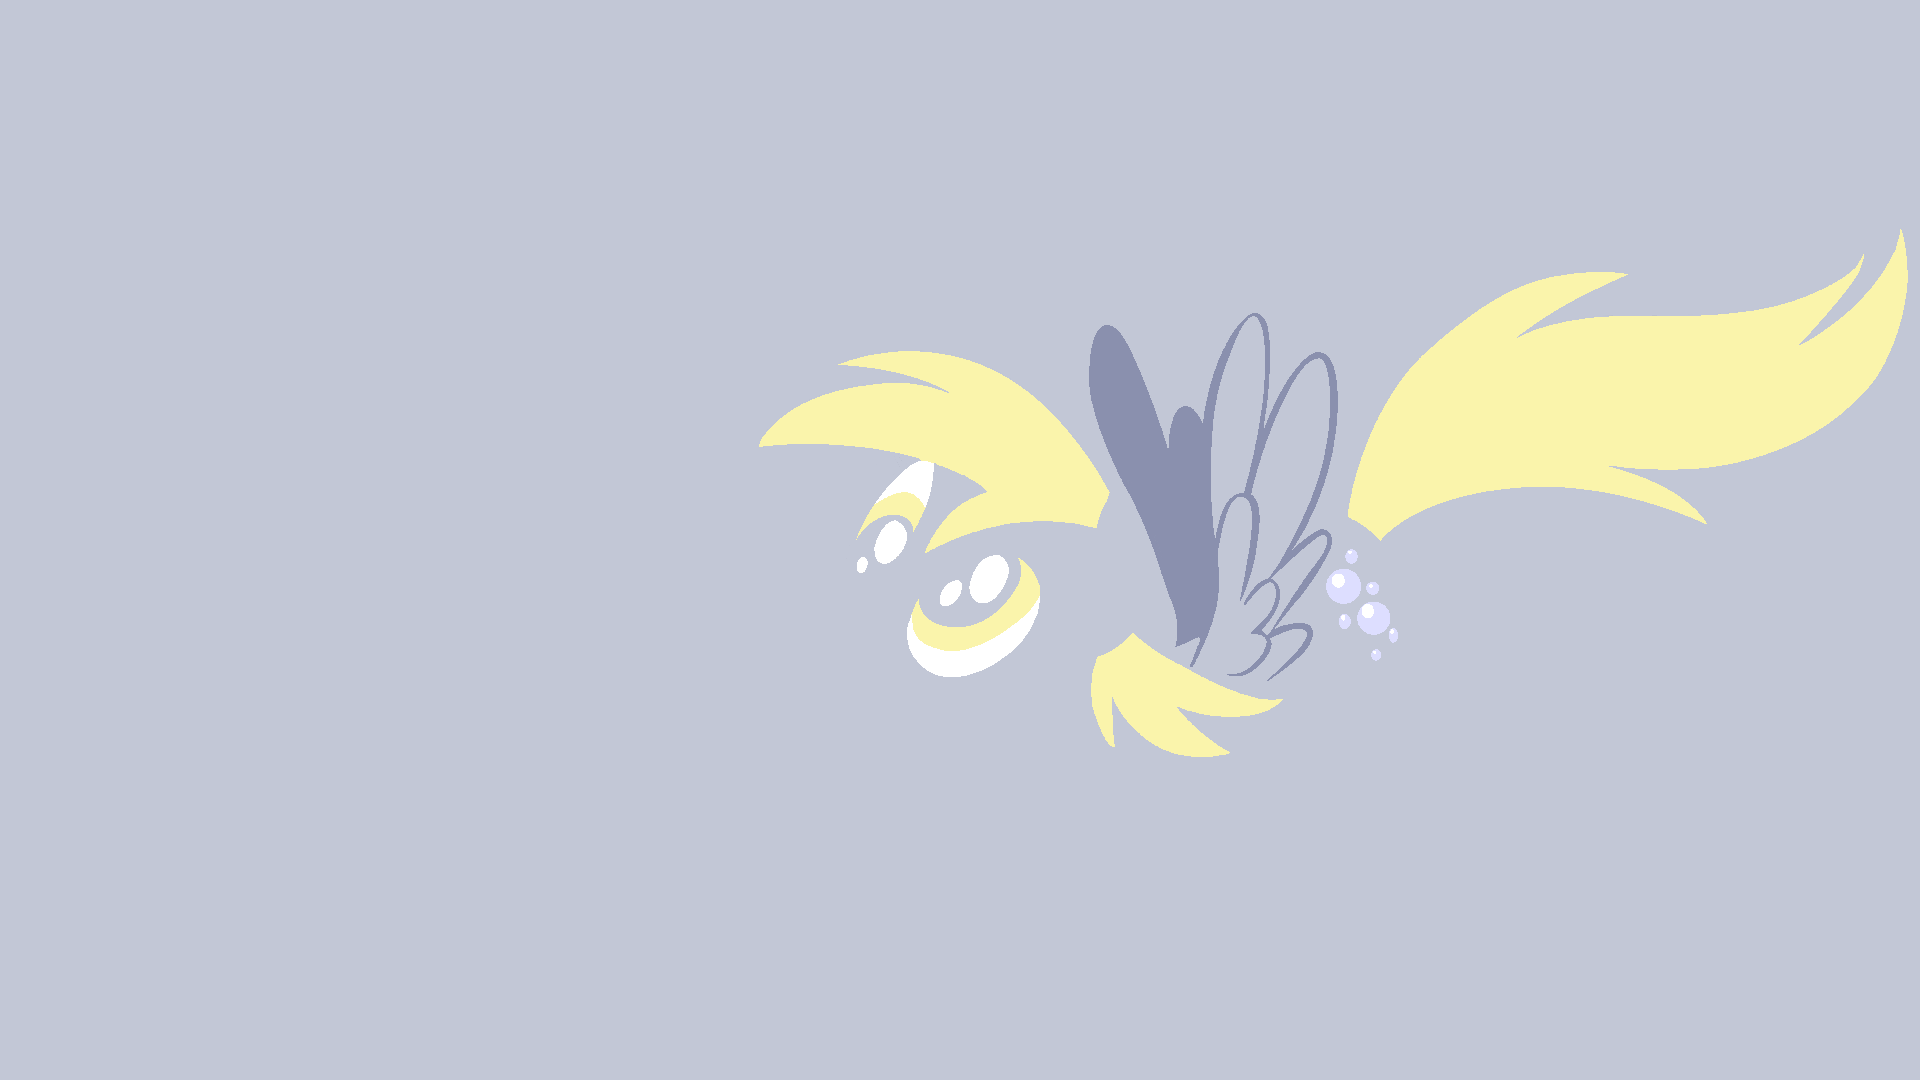 Derpy Hooves Minimal Wallpaper by fyre-flye and Kitana-Coldfire